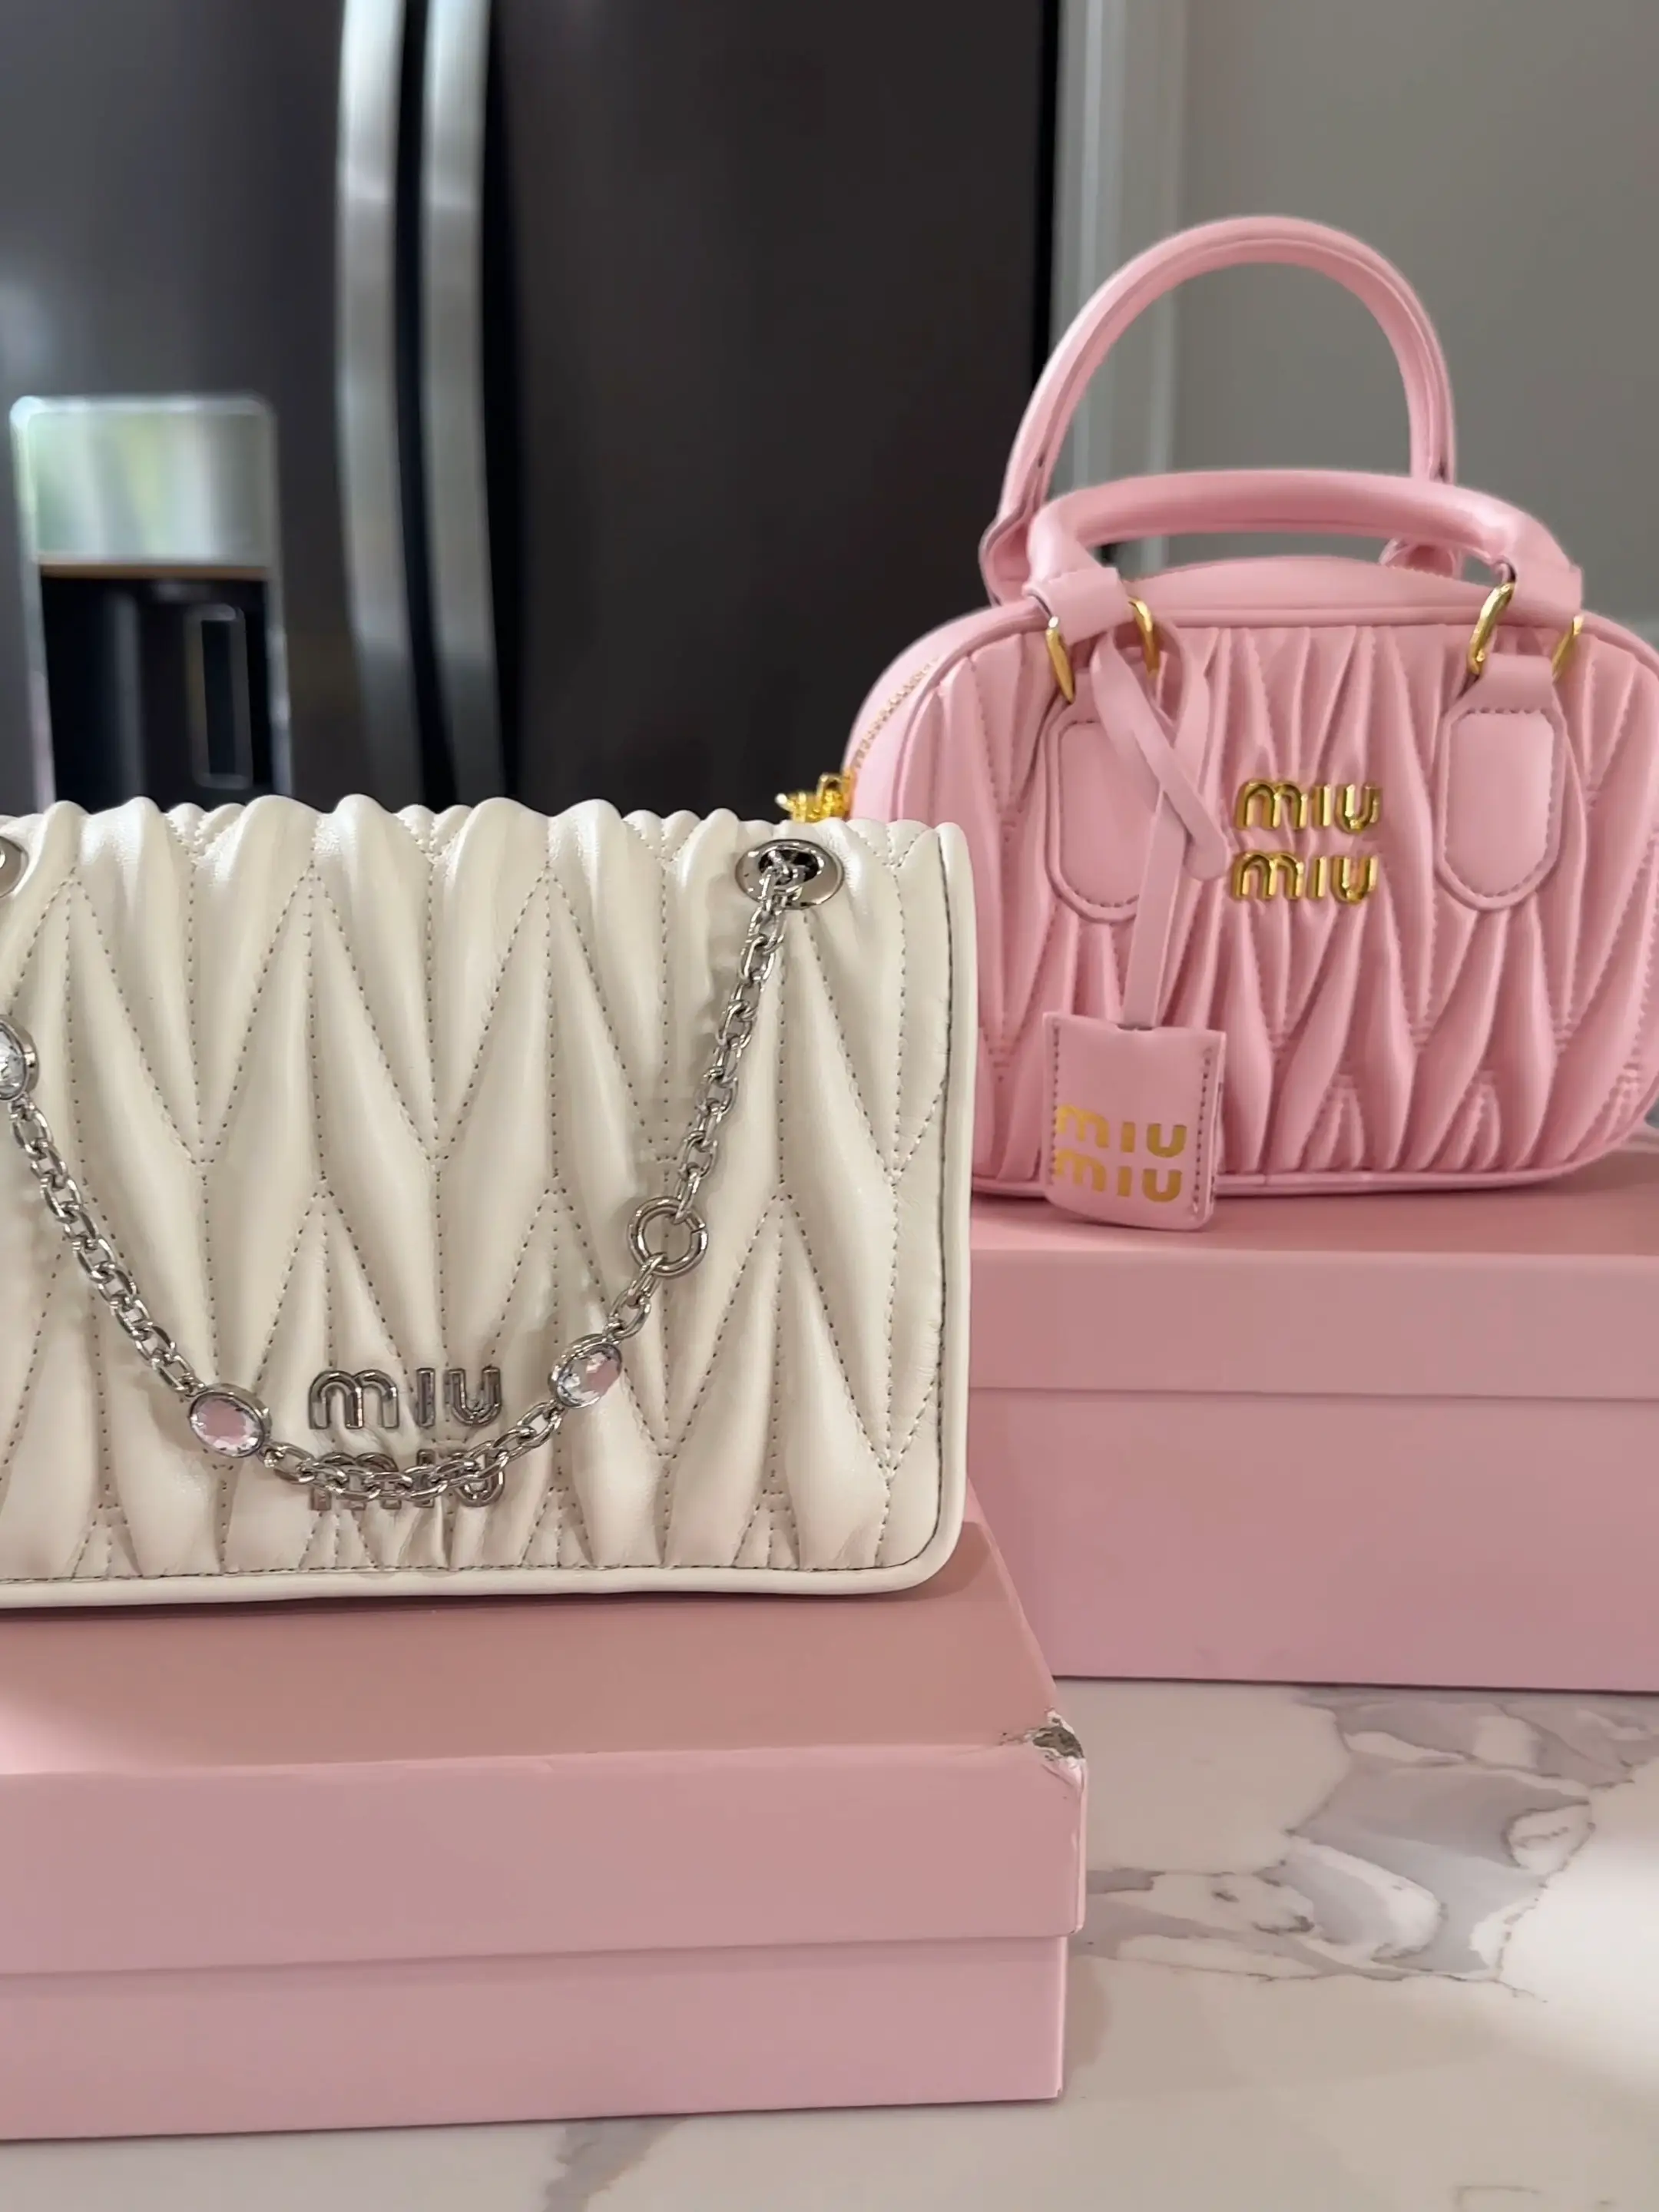 Lady Dior from DHgate #dhgate #dhgatefinds #dhgateunboxing 